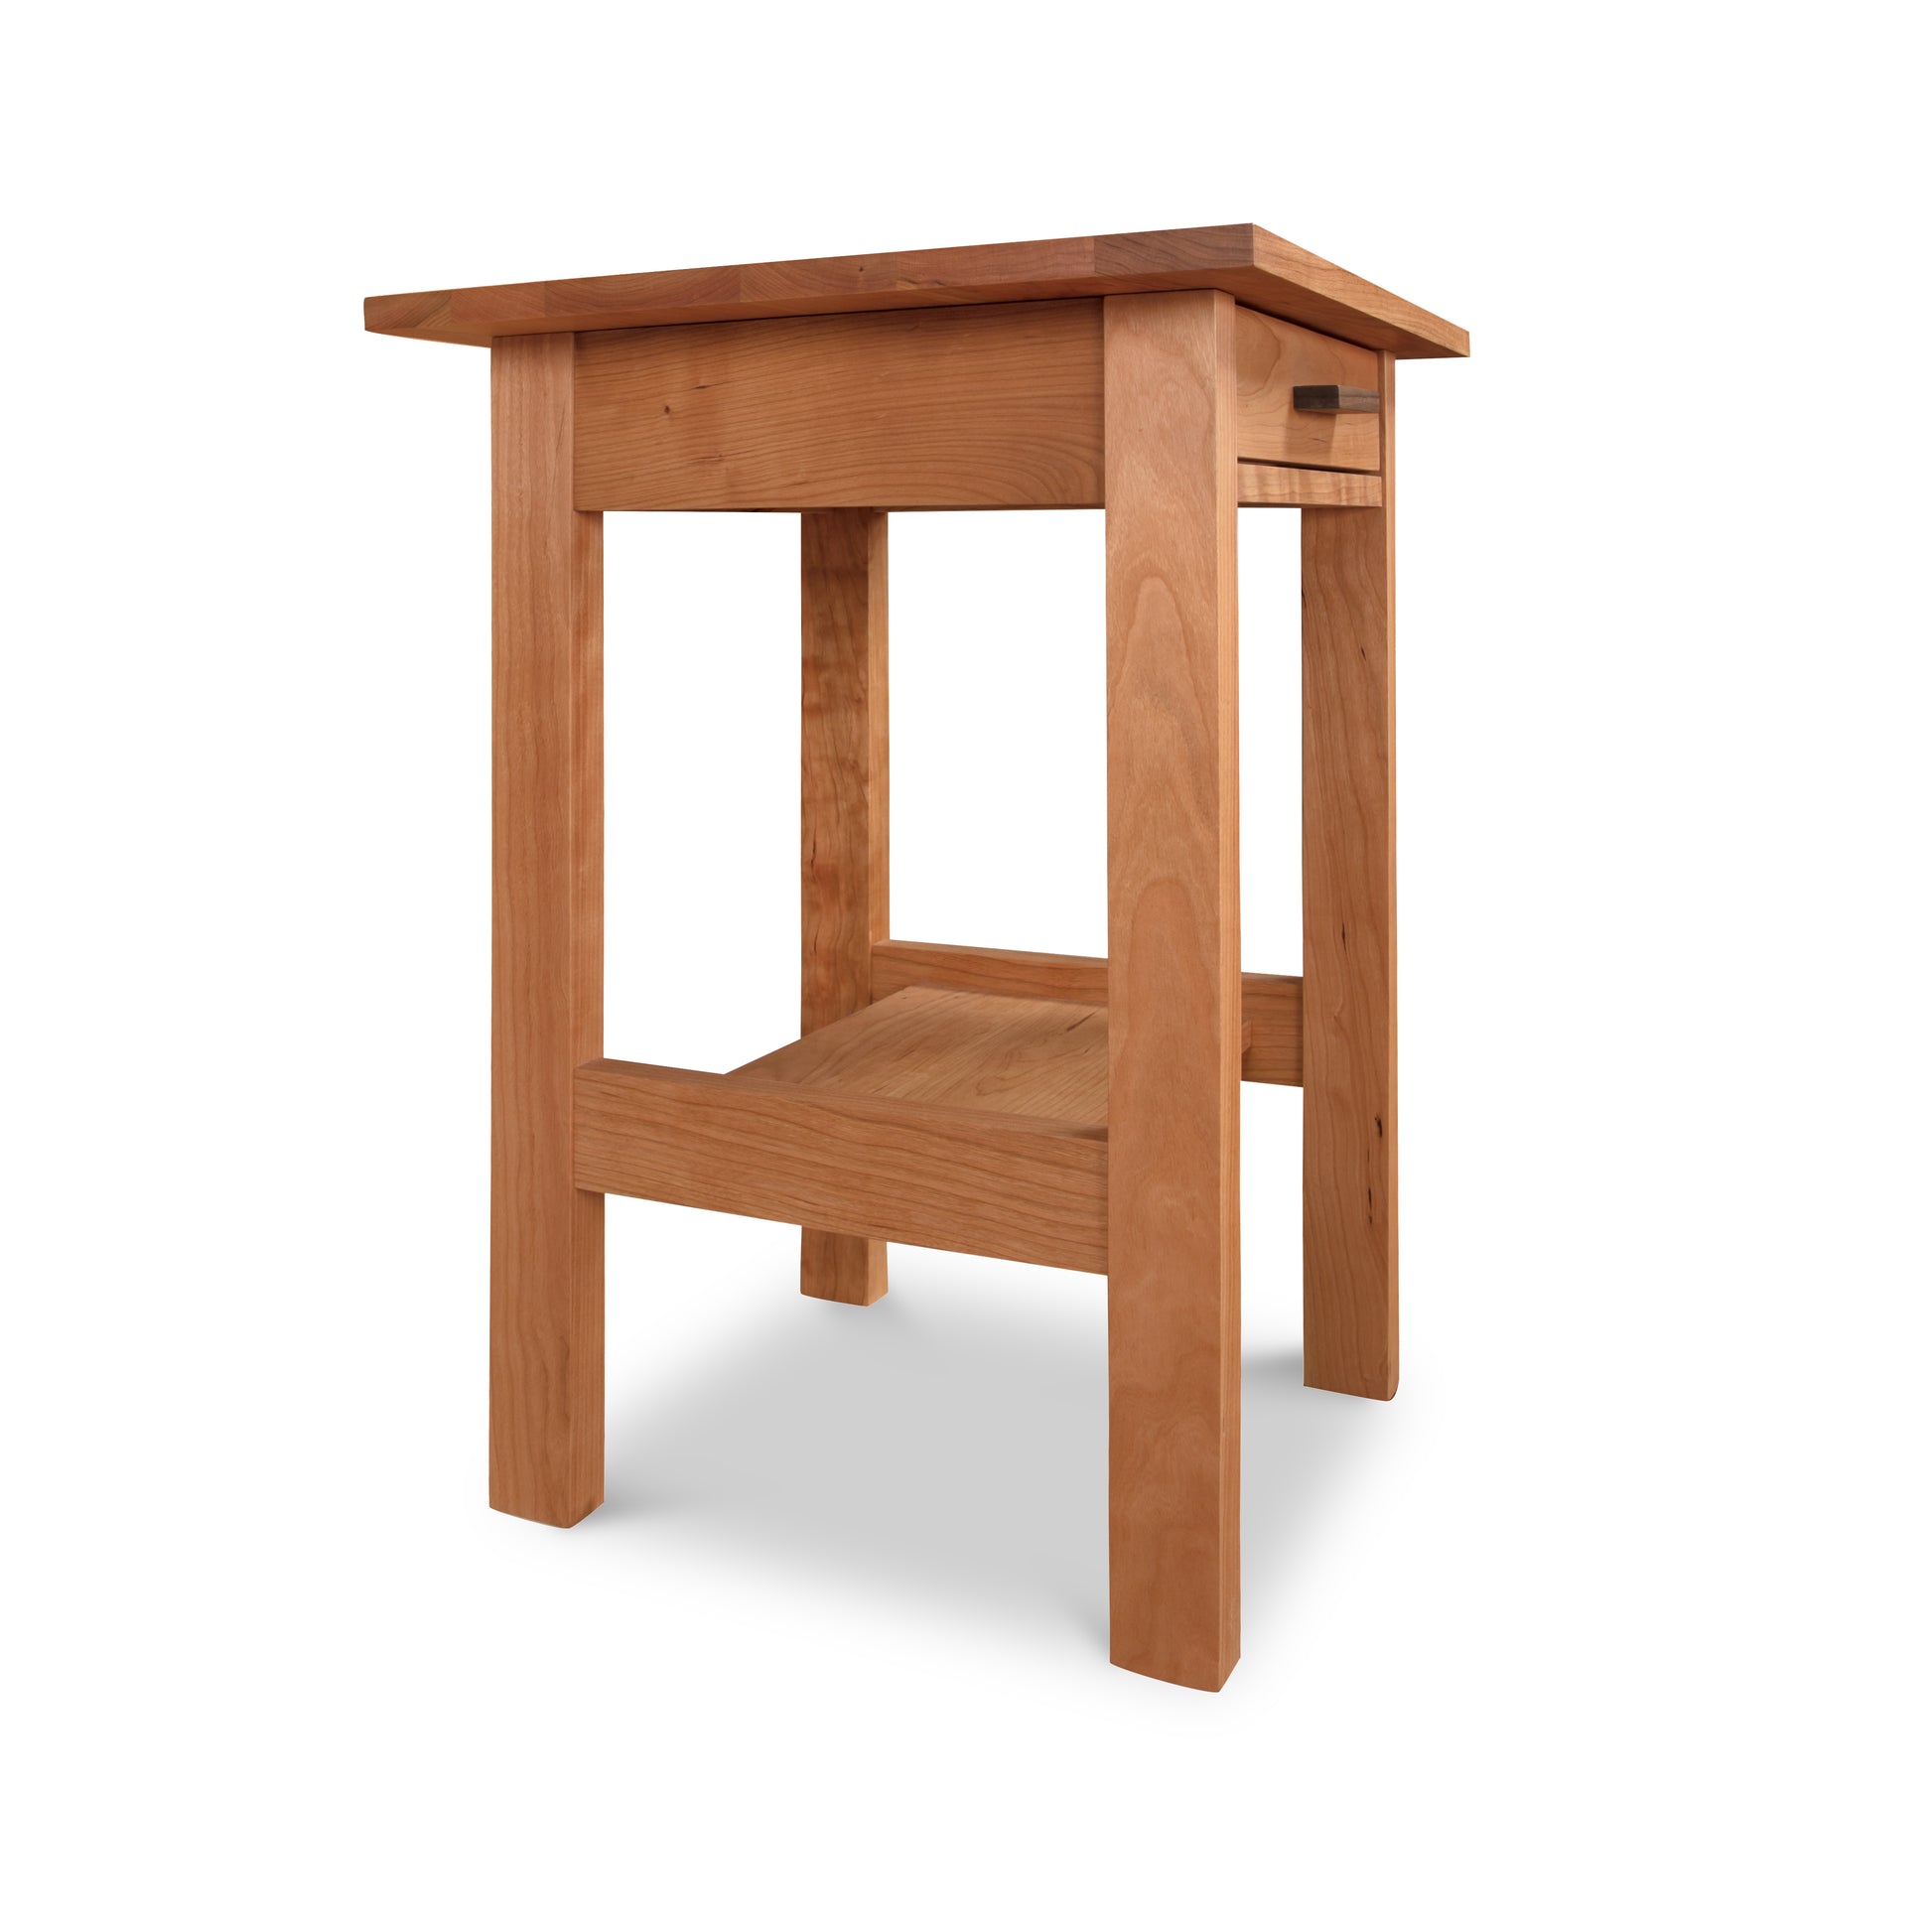 A plain wooden Vermont Furniture Designs Modern Craftsman 1-Drawer Open Shelf Nightstand with a simple design, featuring a flat top, a lower shelf, and straight legs, isolated on a white background.